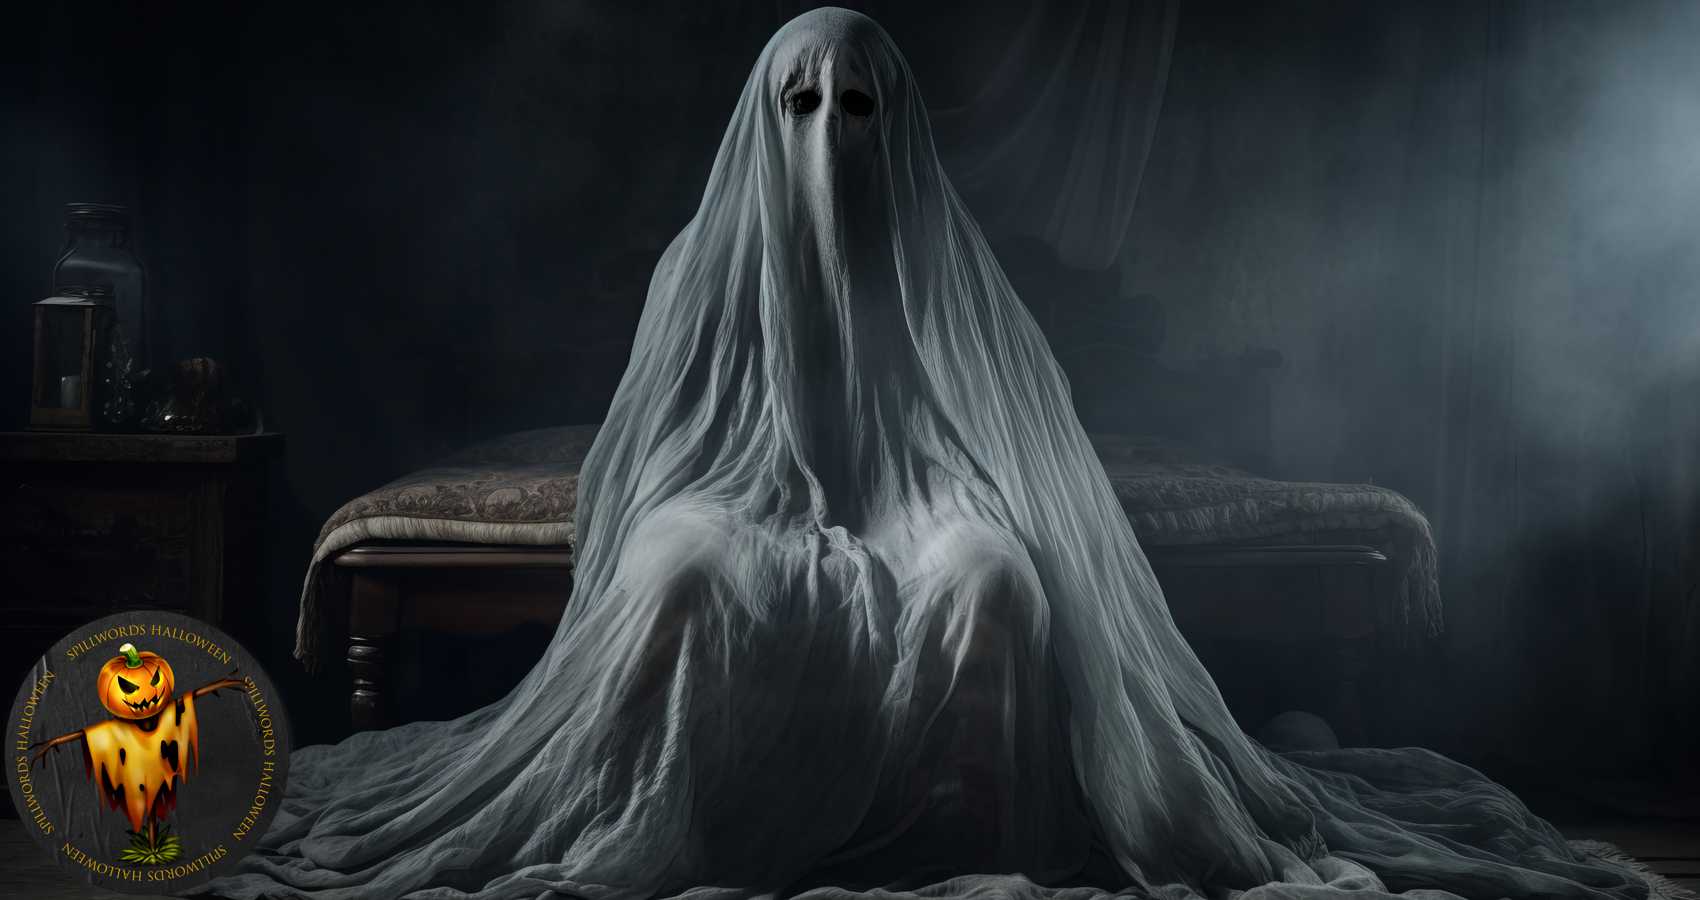 A Fraid of Ghosts, flash fiction by Cheryl Snell at Spillwords.com